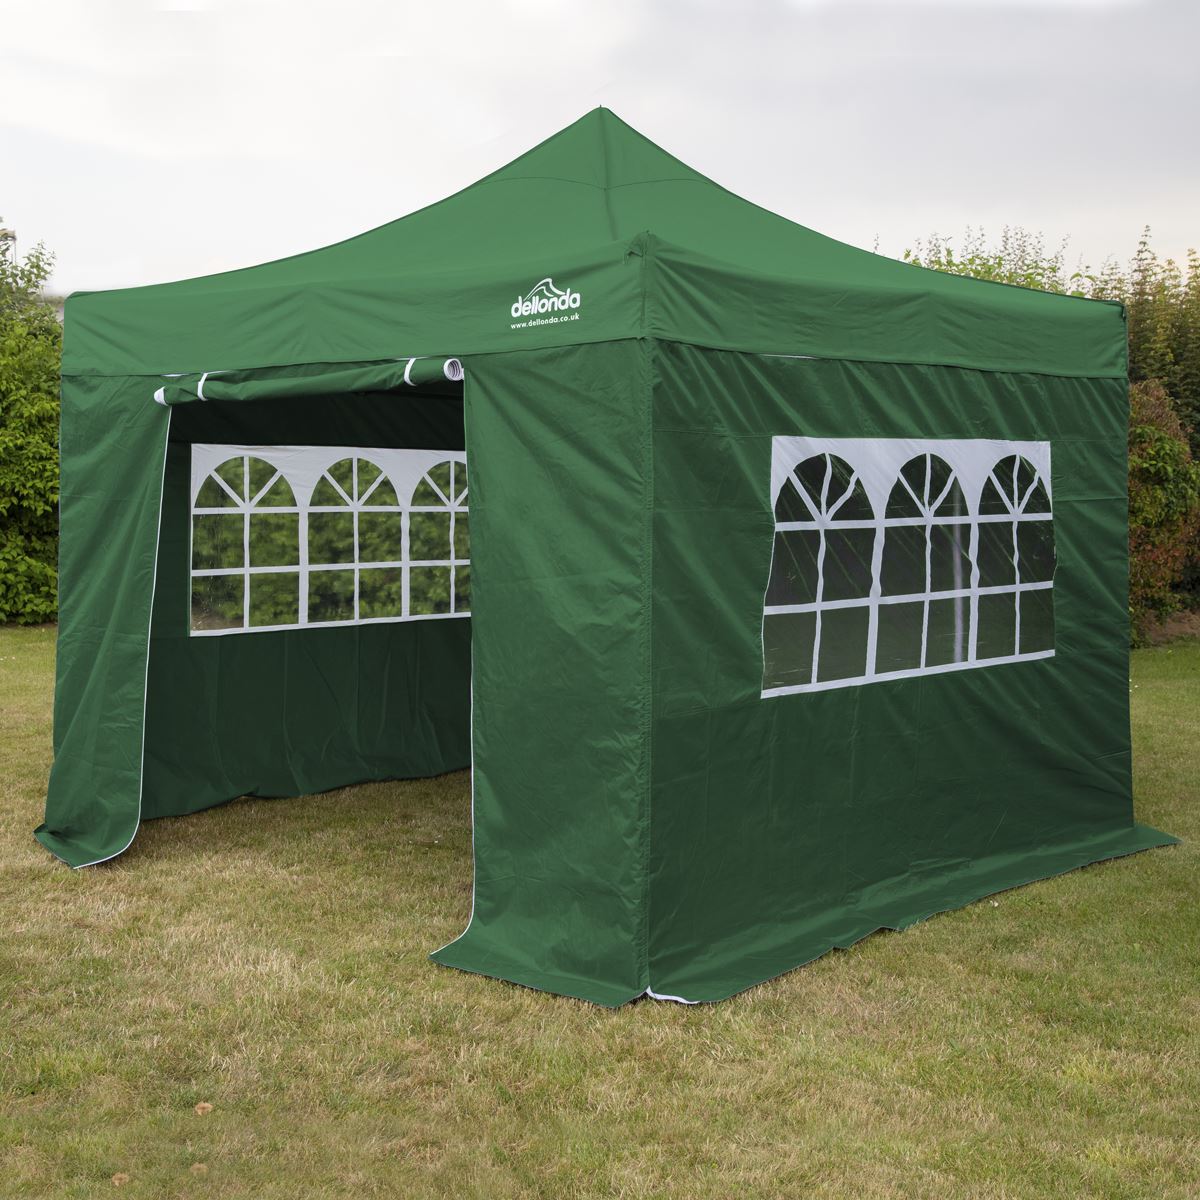 Dellonda Premium 2x2m Pop-Up Gazebo & Side Walls, PVC Coated, Water Resistant Fabric with Carry Bag, Rope, Stakes & Weight Bags - Green